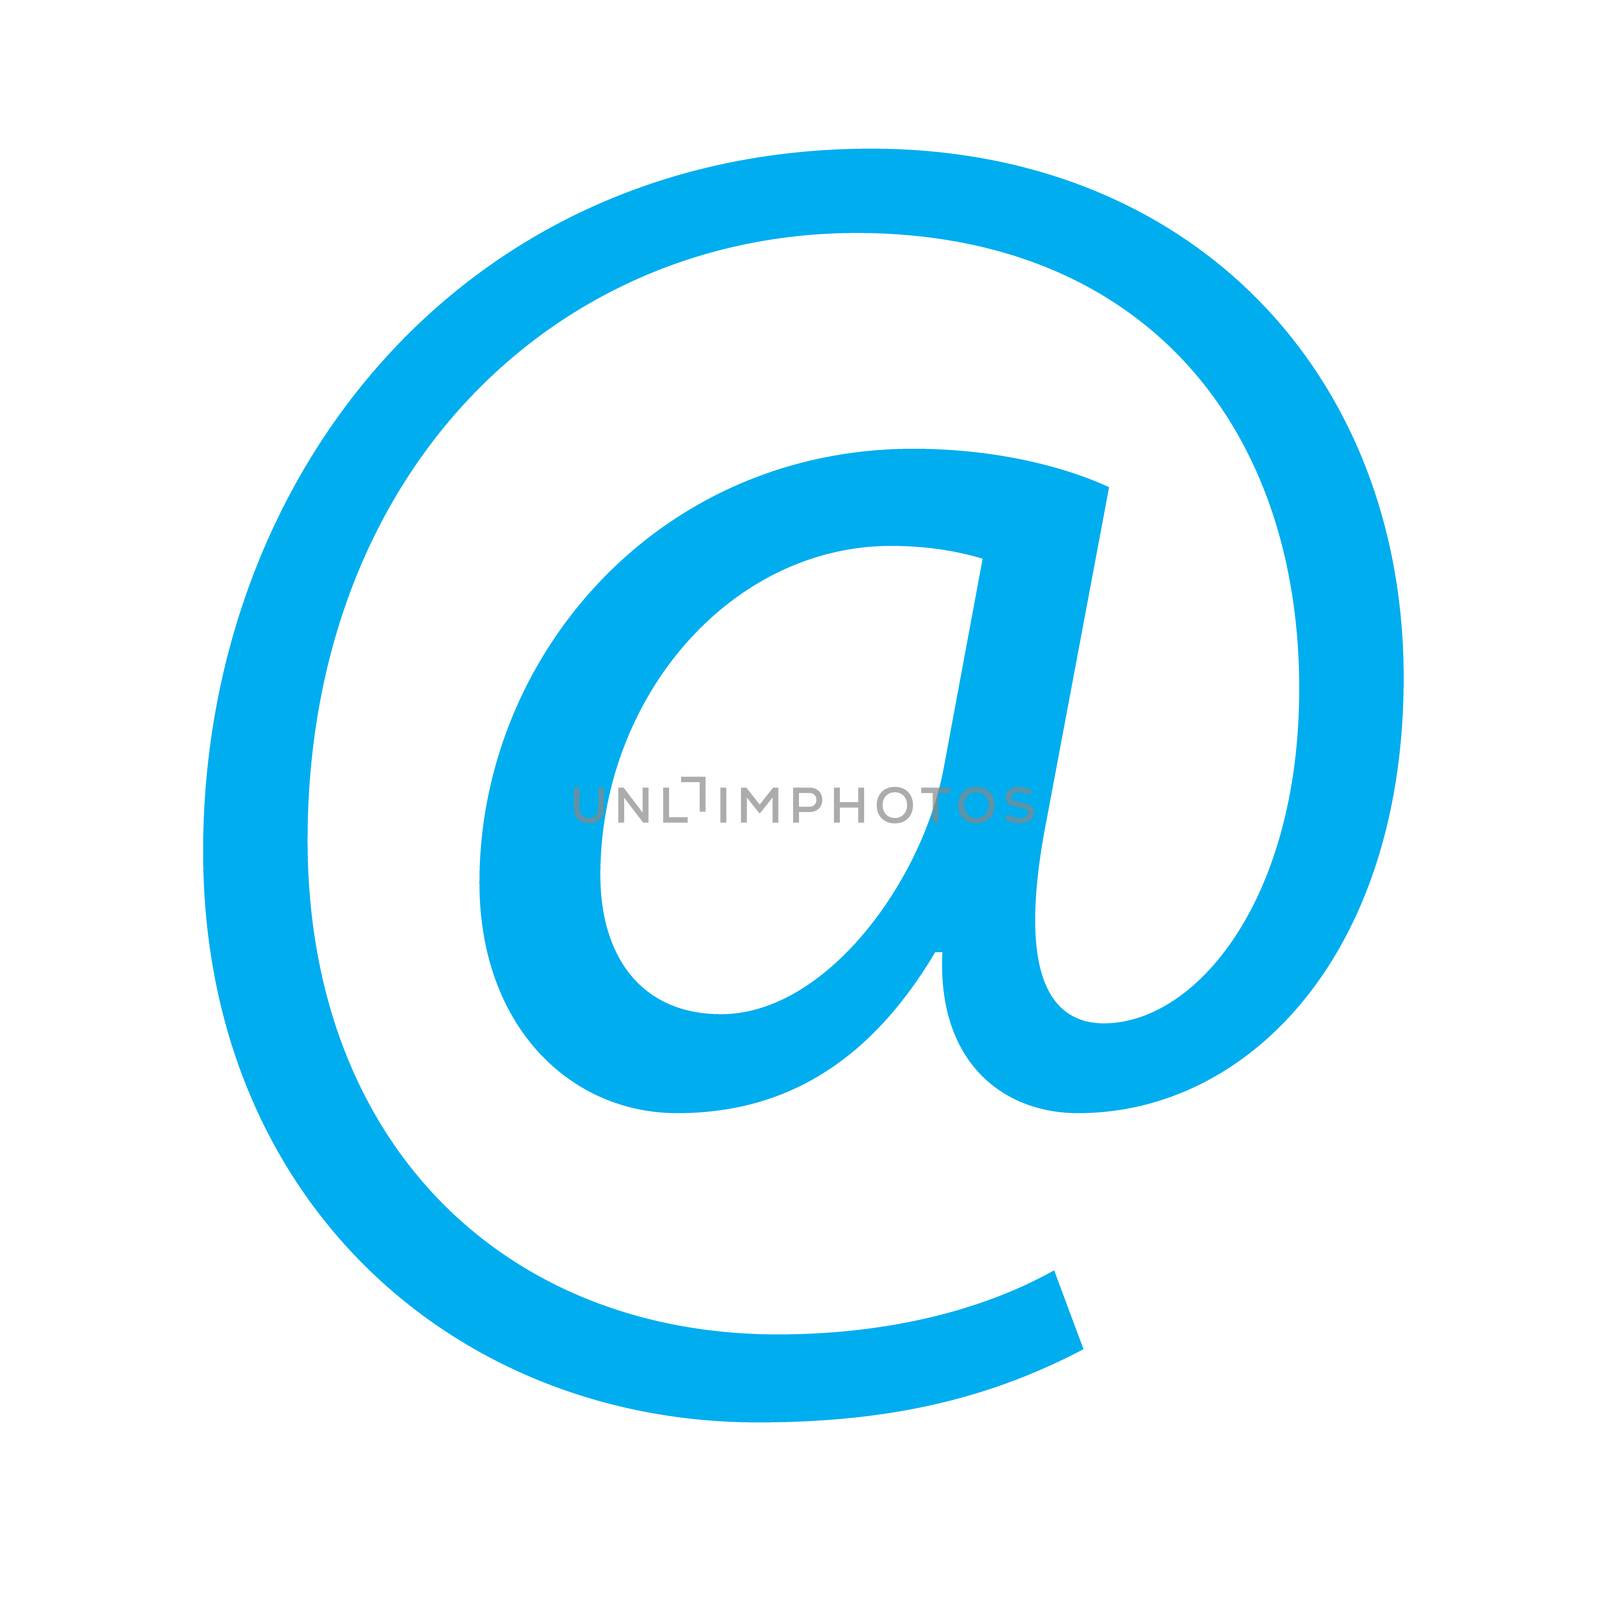 email web icon flat design style. email web sign. email icon for your web site design, logo, app, UI.